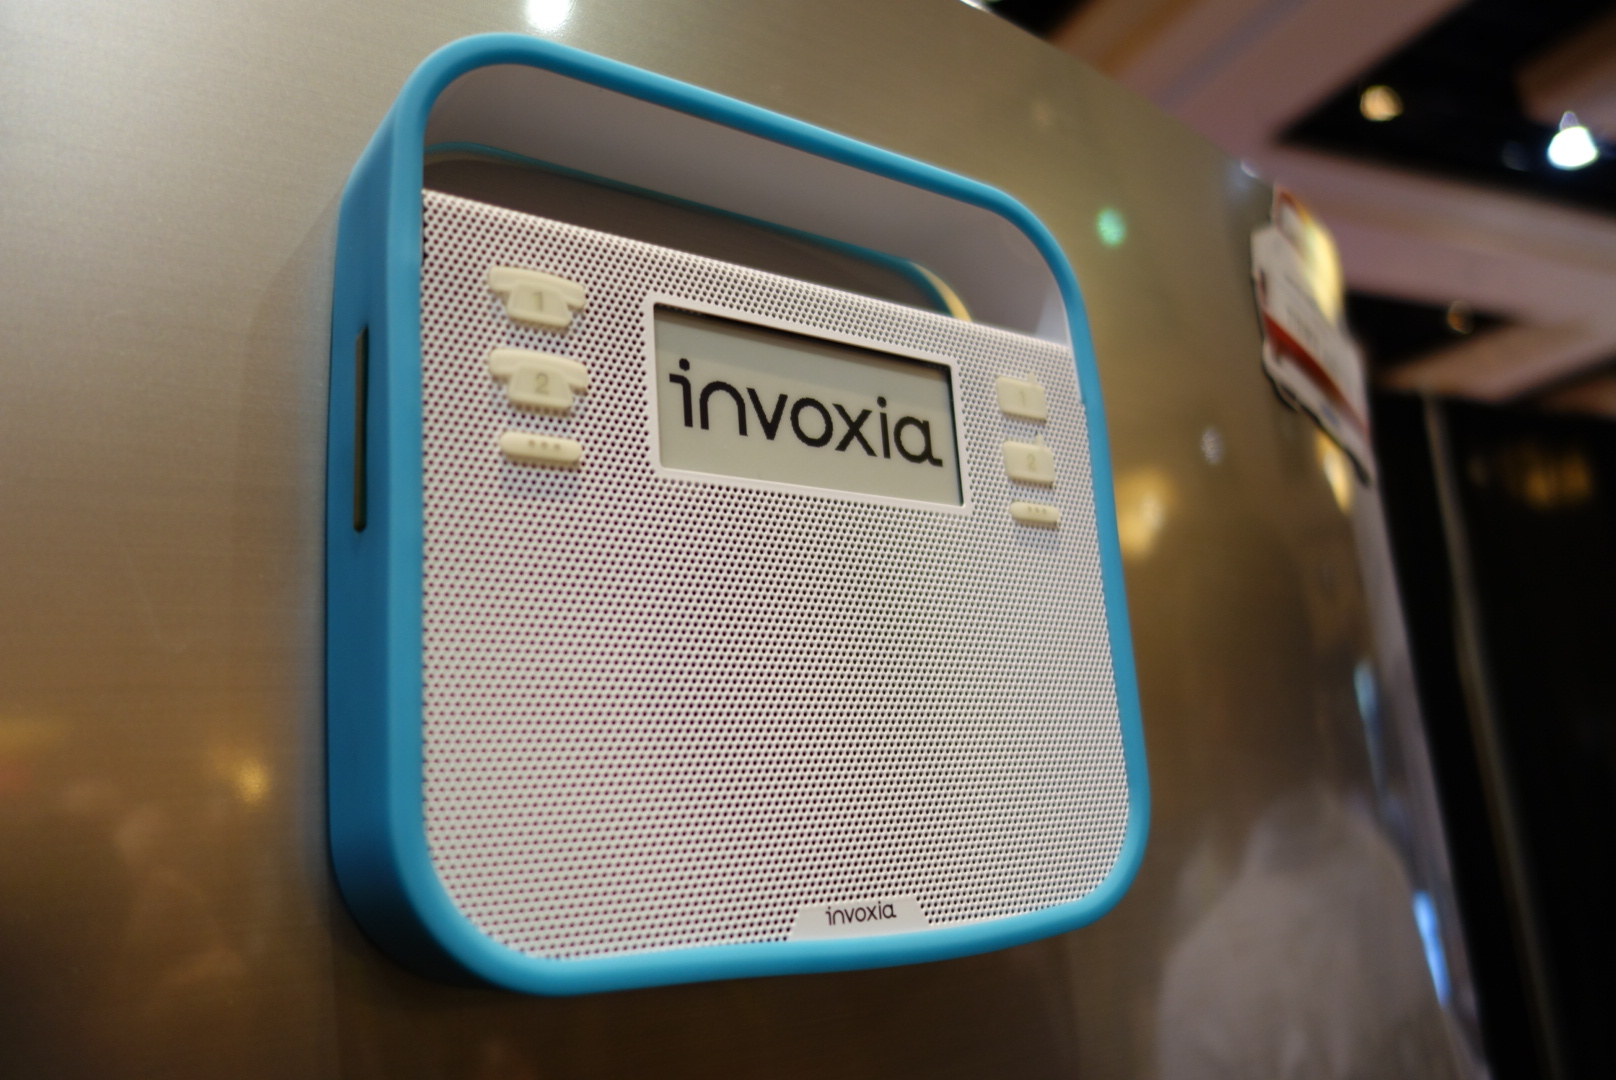 The Invoxia Triby will be available in multiple colors when it launches later this year.